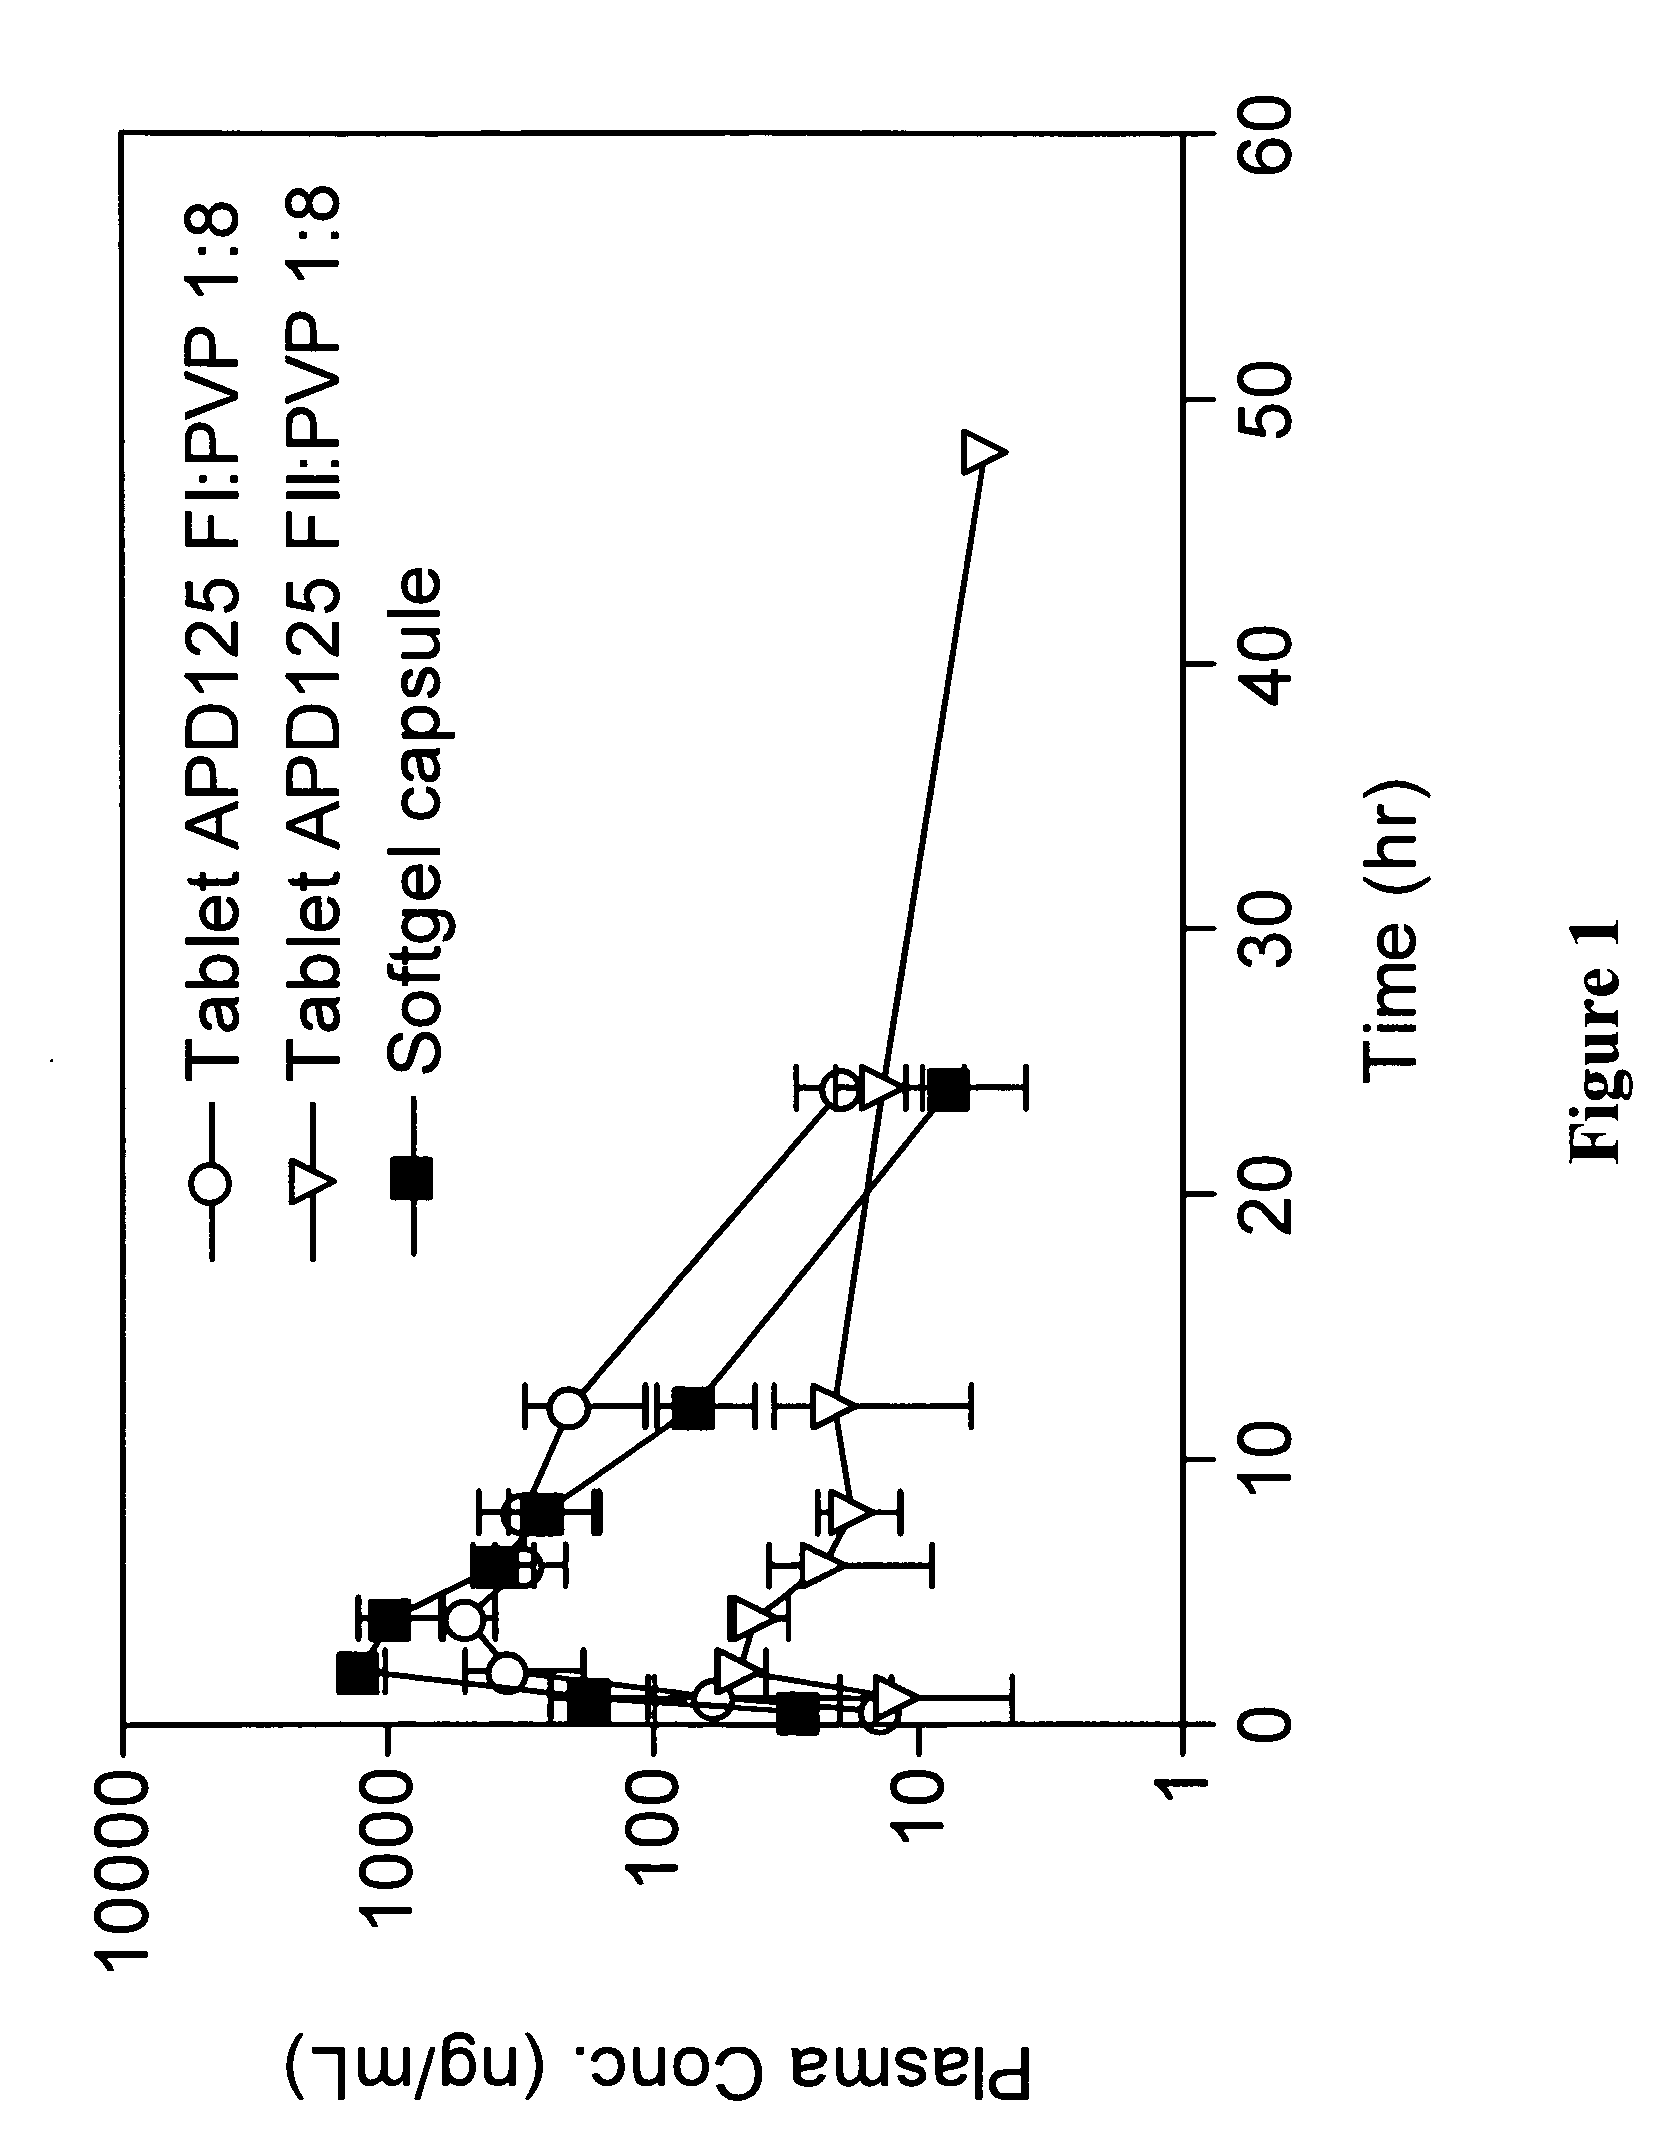 Composition of a 5-ht2a serotonin receptor modulator useful for the treatment of disorders related thereto